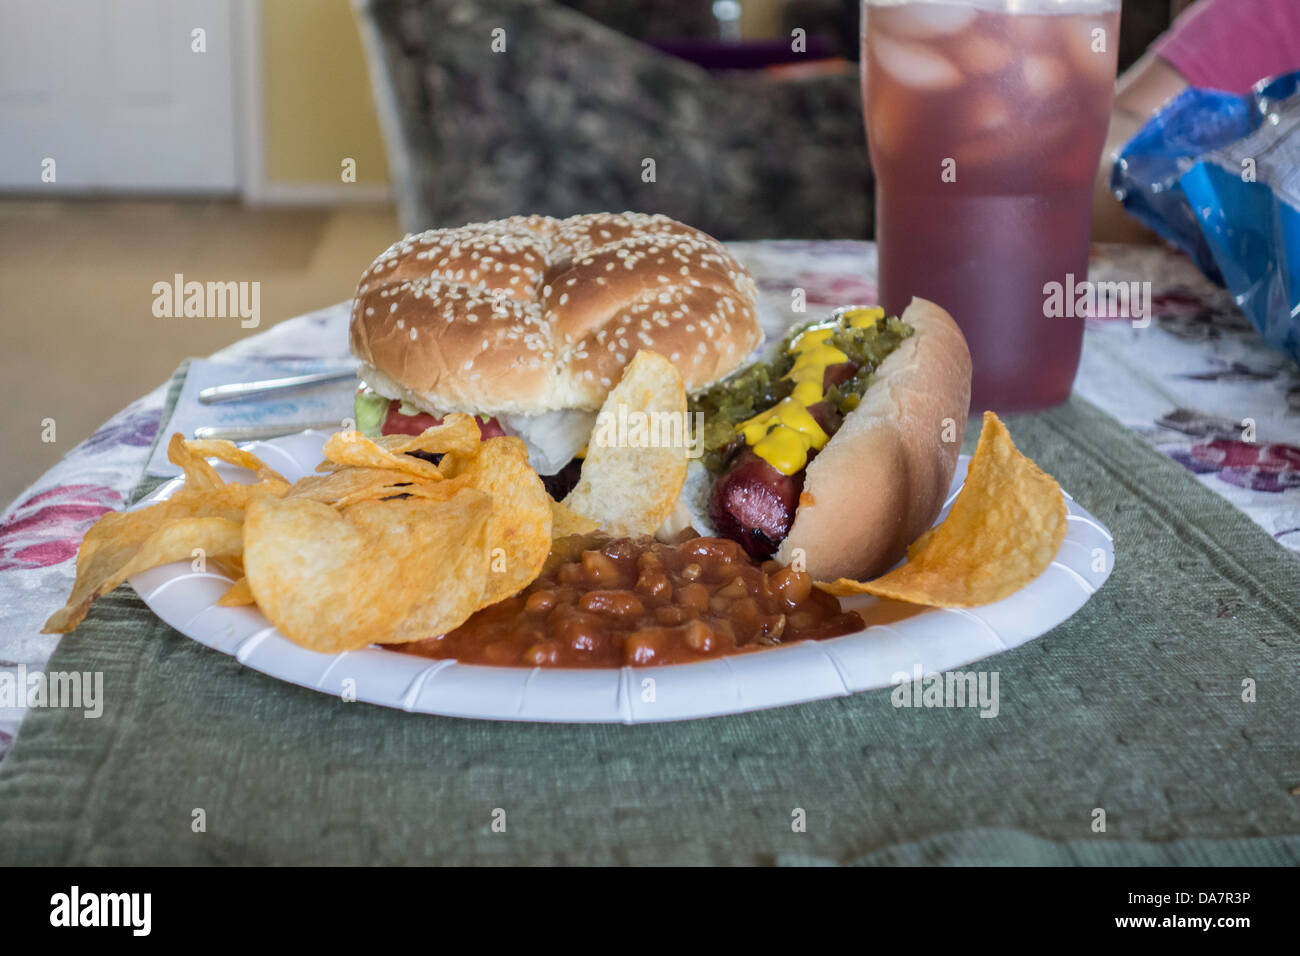 Barbeque hamburgers and hot dogs, cooked outdoors and eaten inside on paper plates. USA Stock Photo